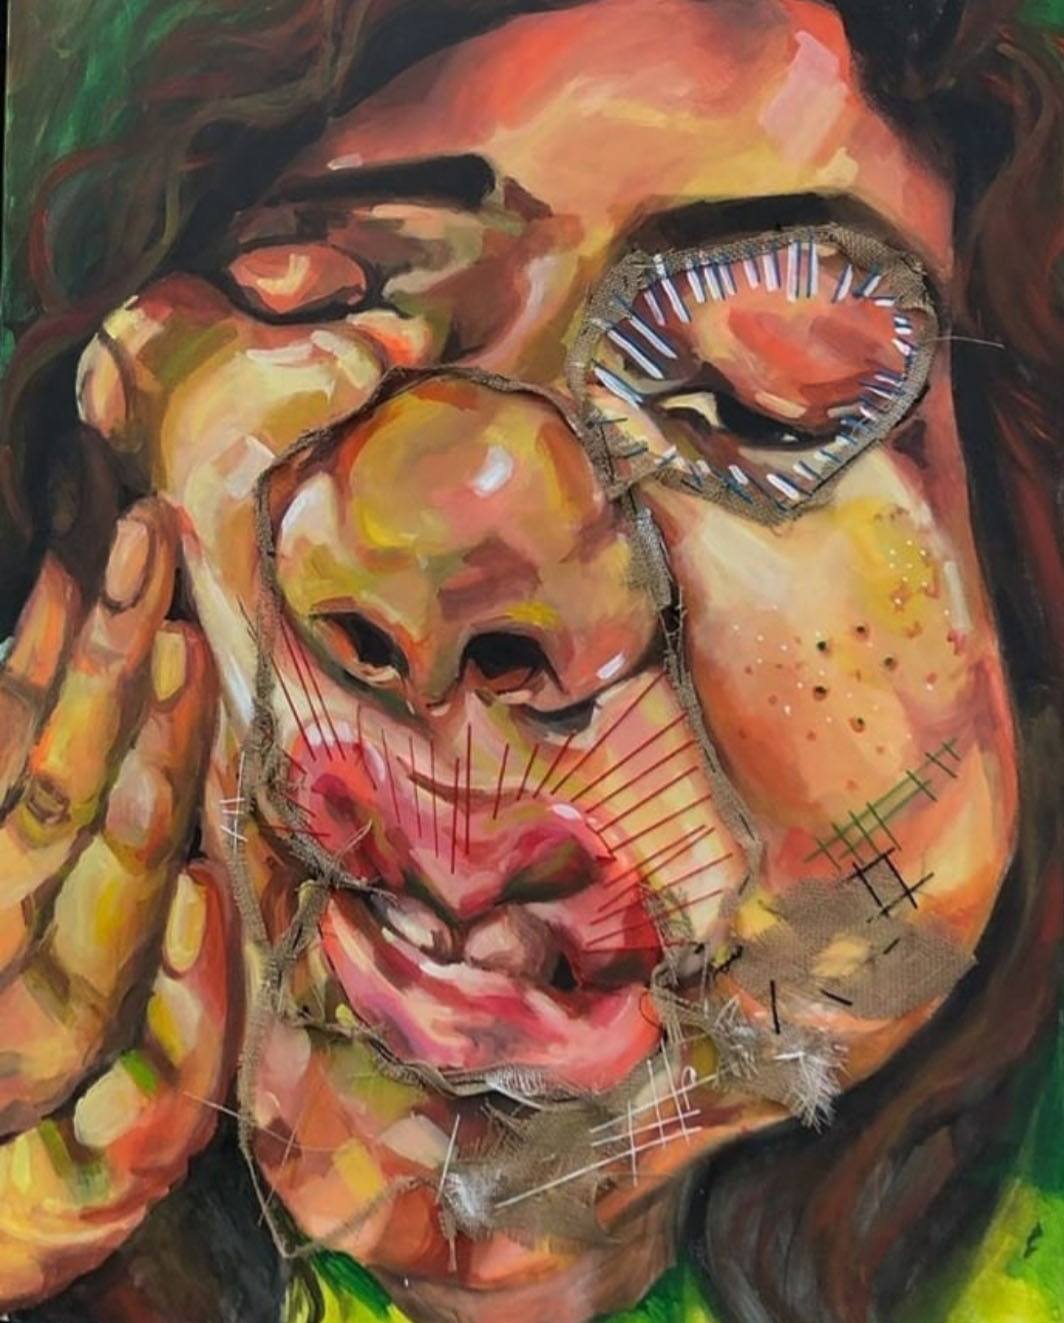 A painting of a face with stitching